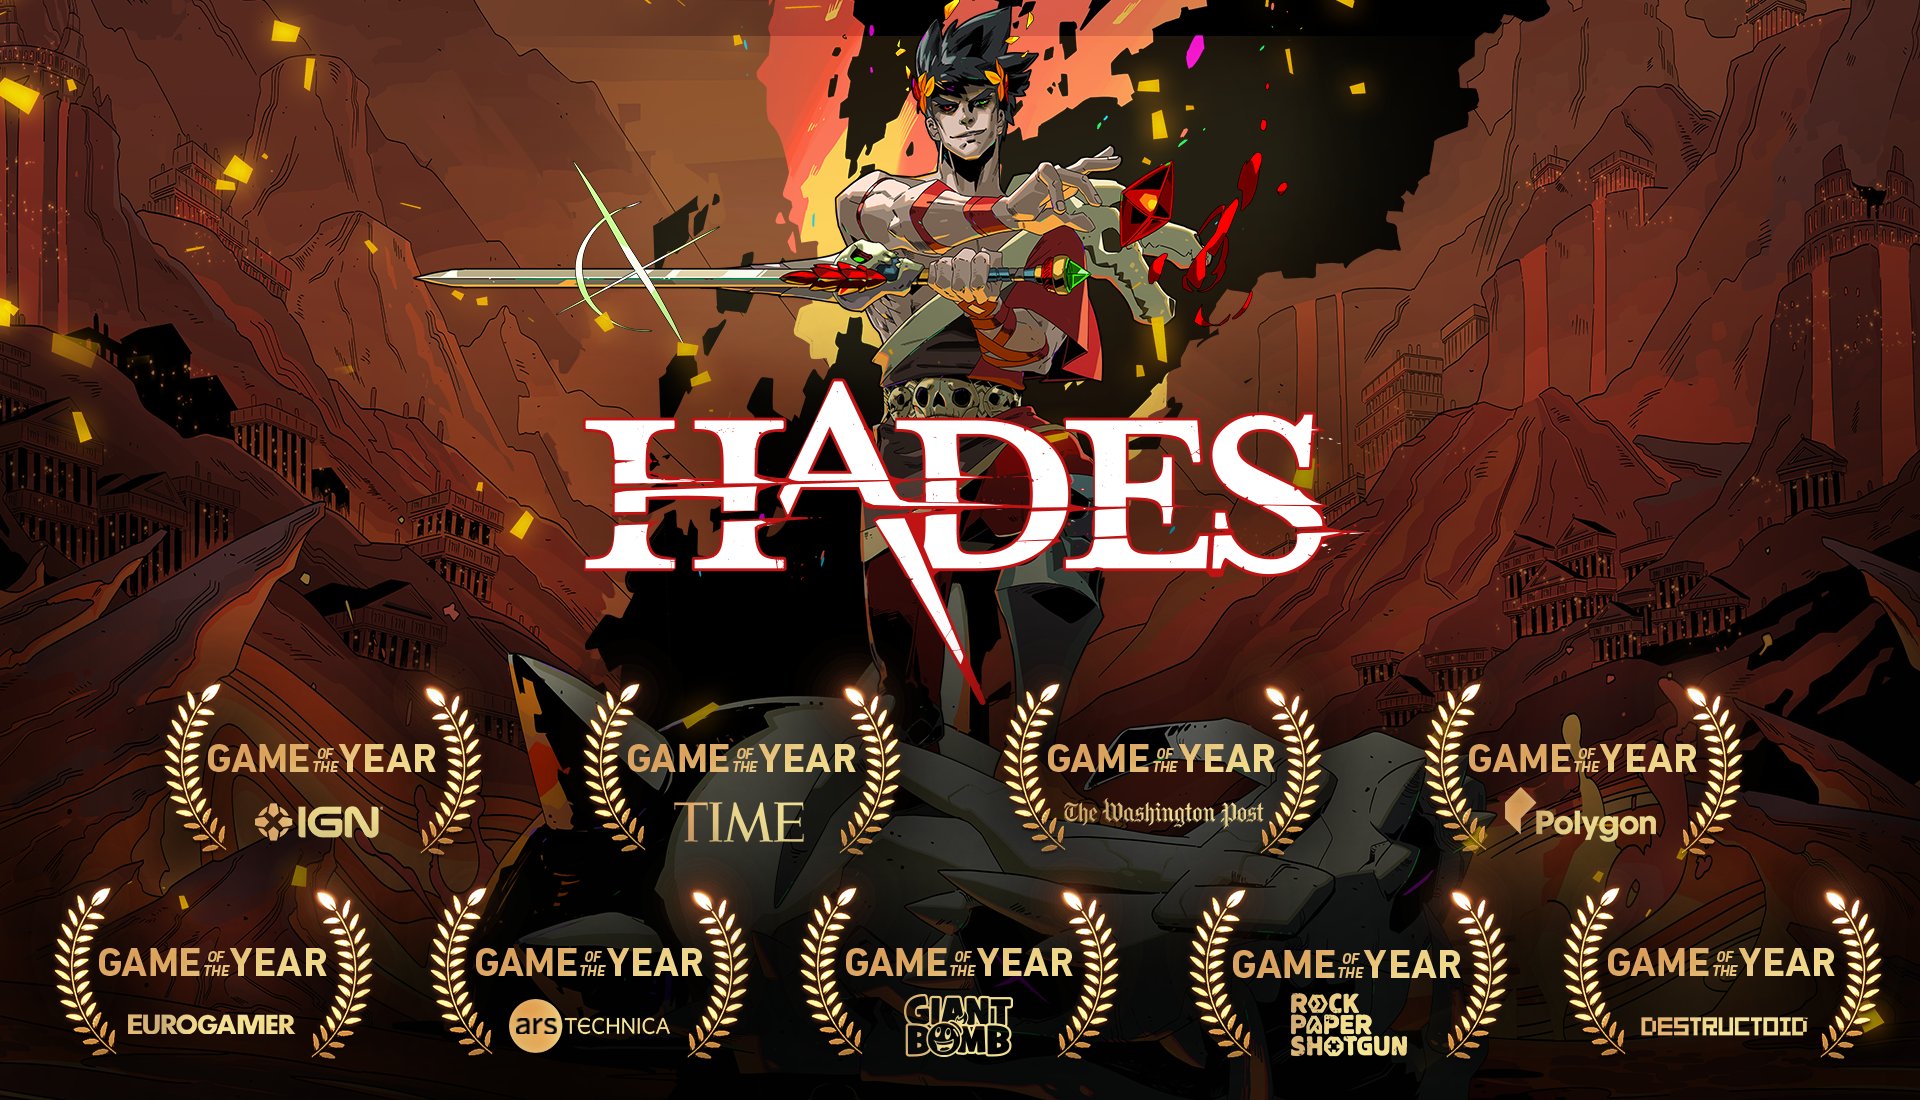 Hades news: Updates on Supergiant Games' Hades 2 and more